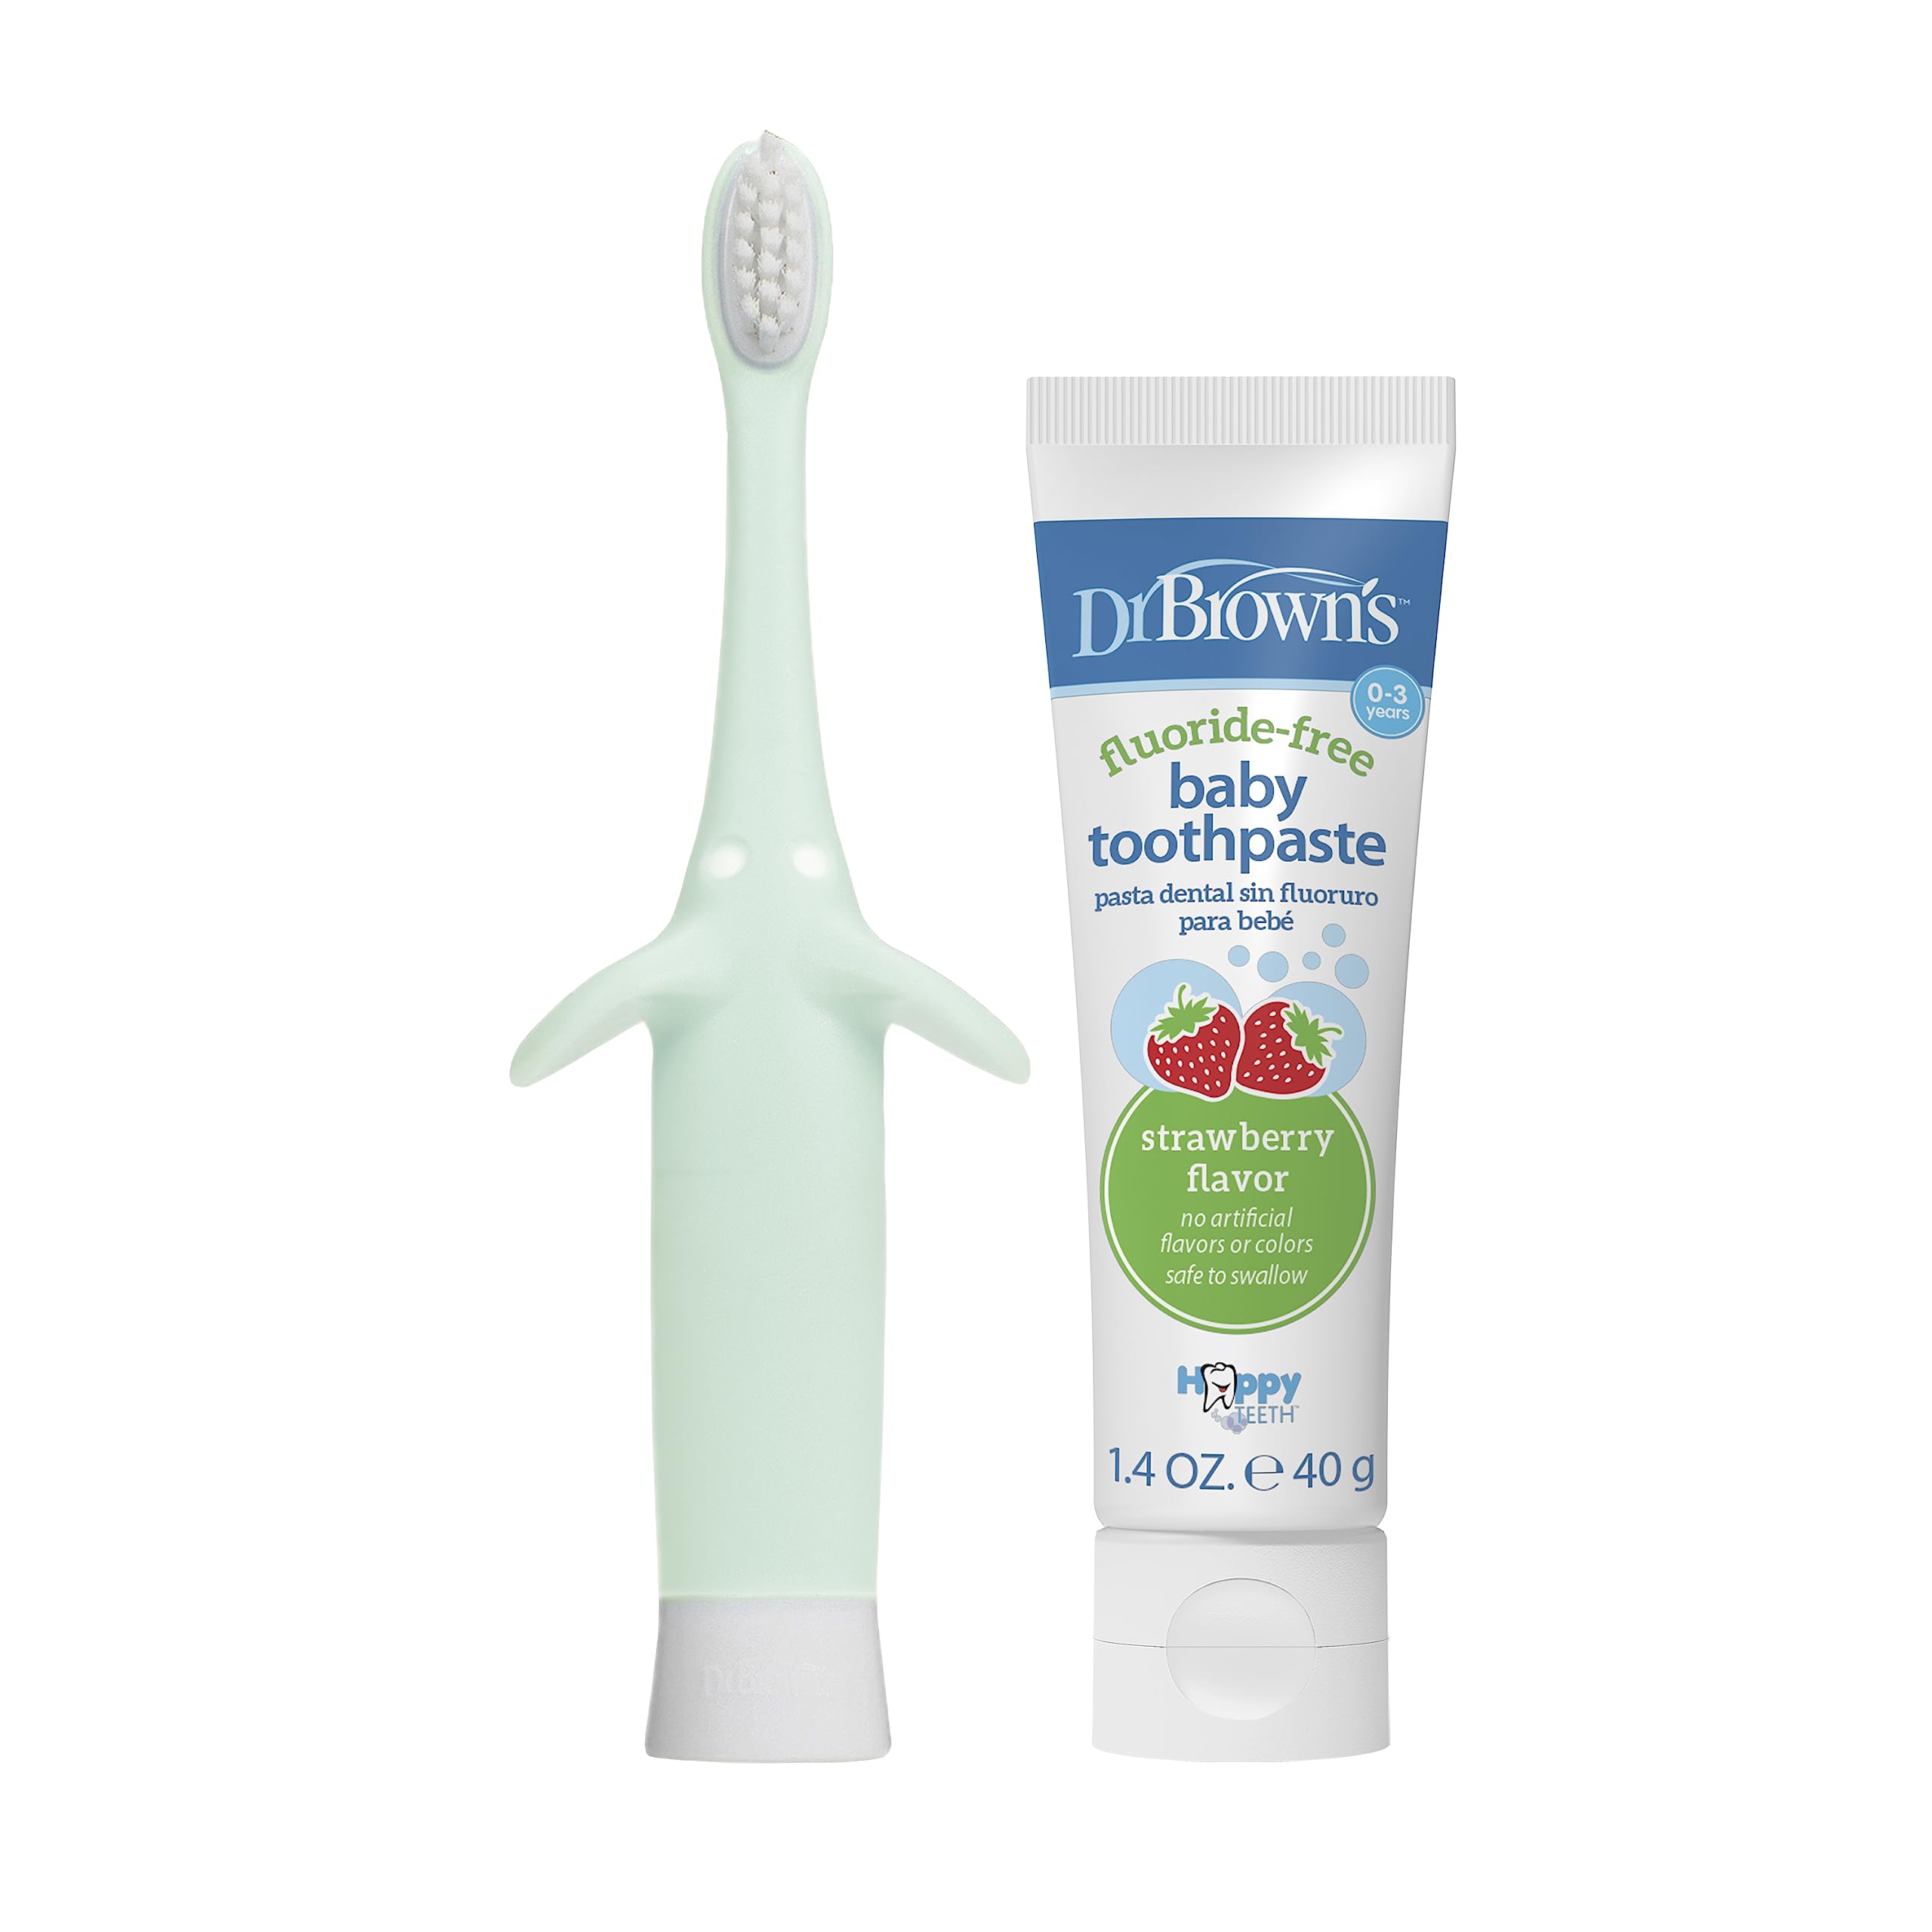 Dr. Brown's Infant-to-Toddler Training Toothbrush Set, Mint Elephant with Fluoride-Free Strawberry Baby Toothpaste, 0-3 Years